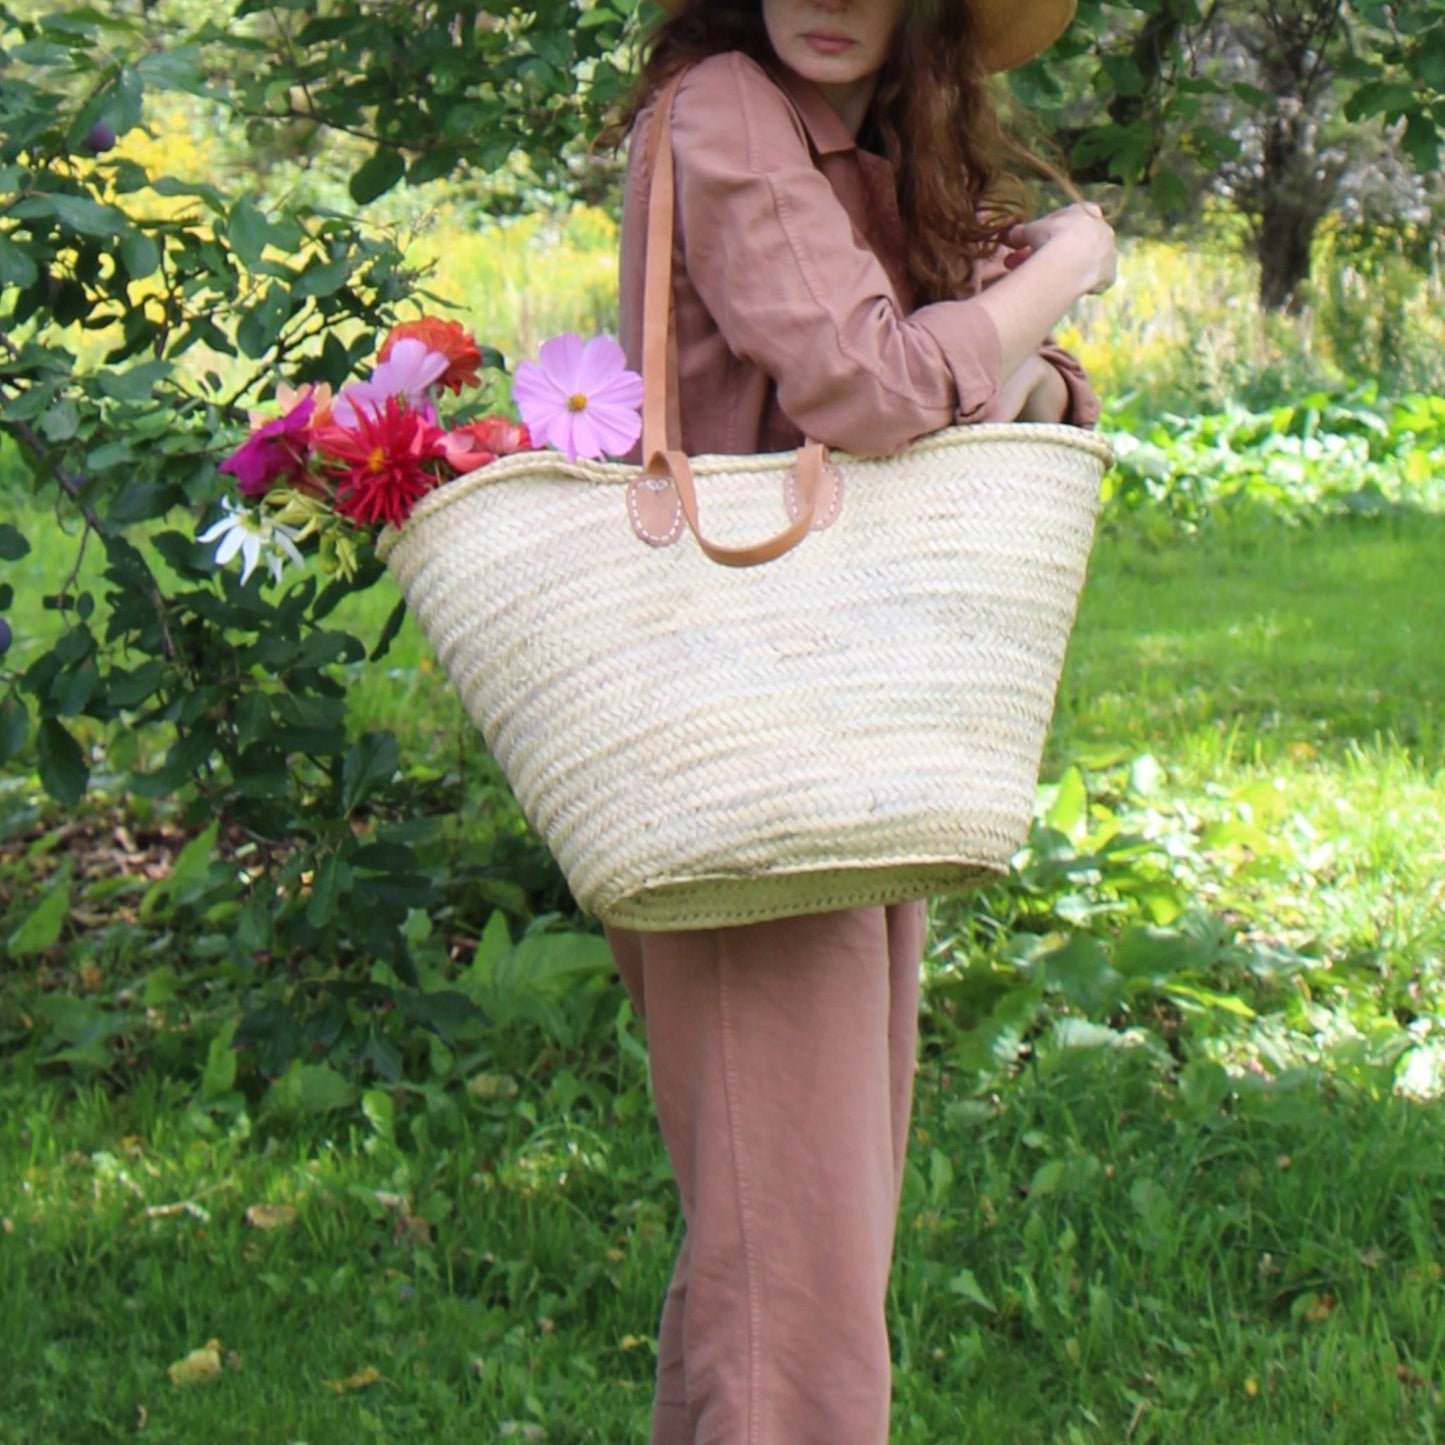 French Market Tote Basket with flowers in it carried by a woman